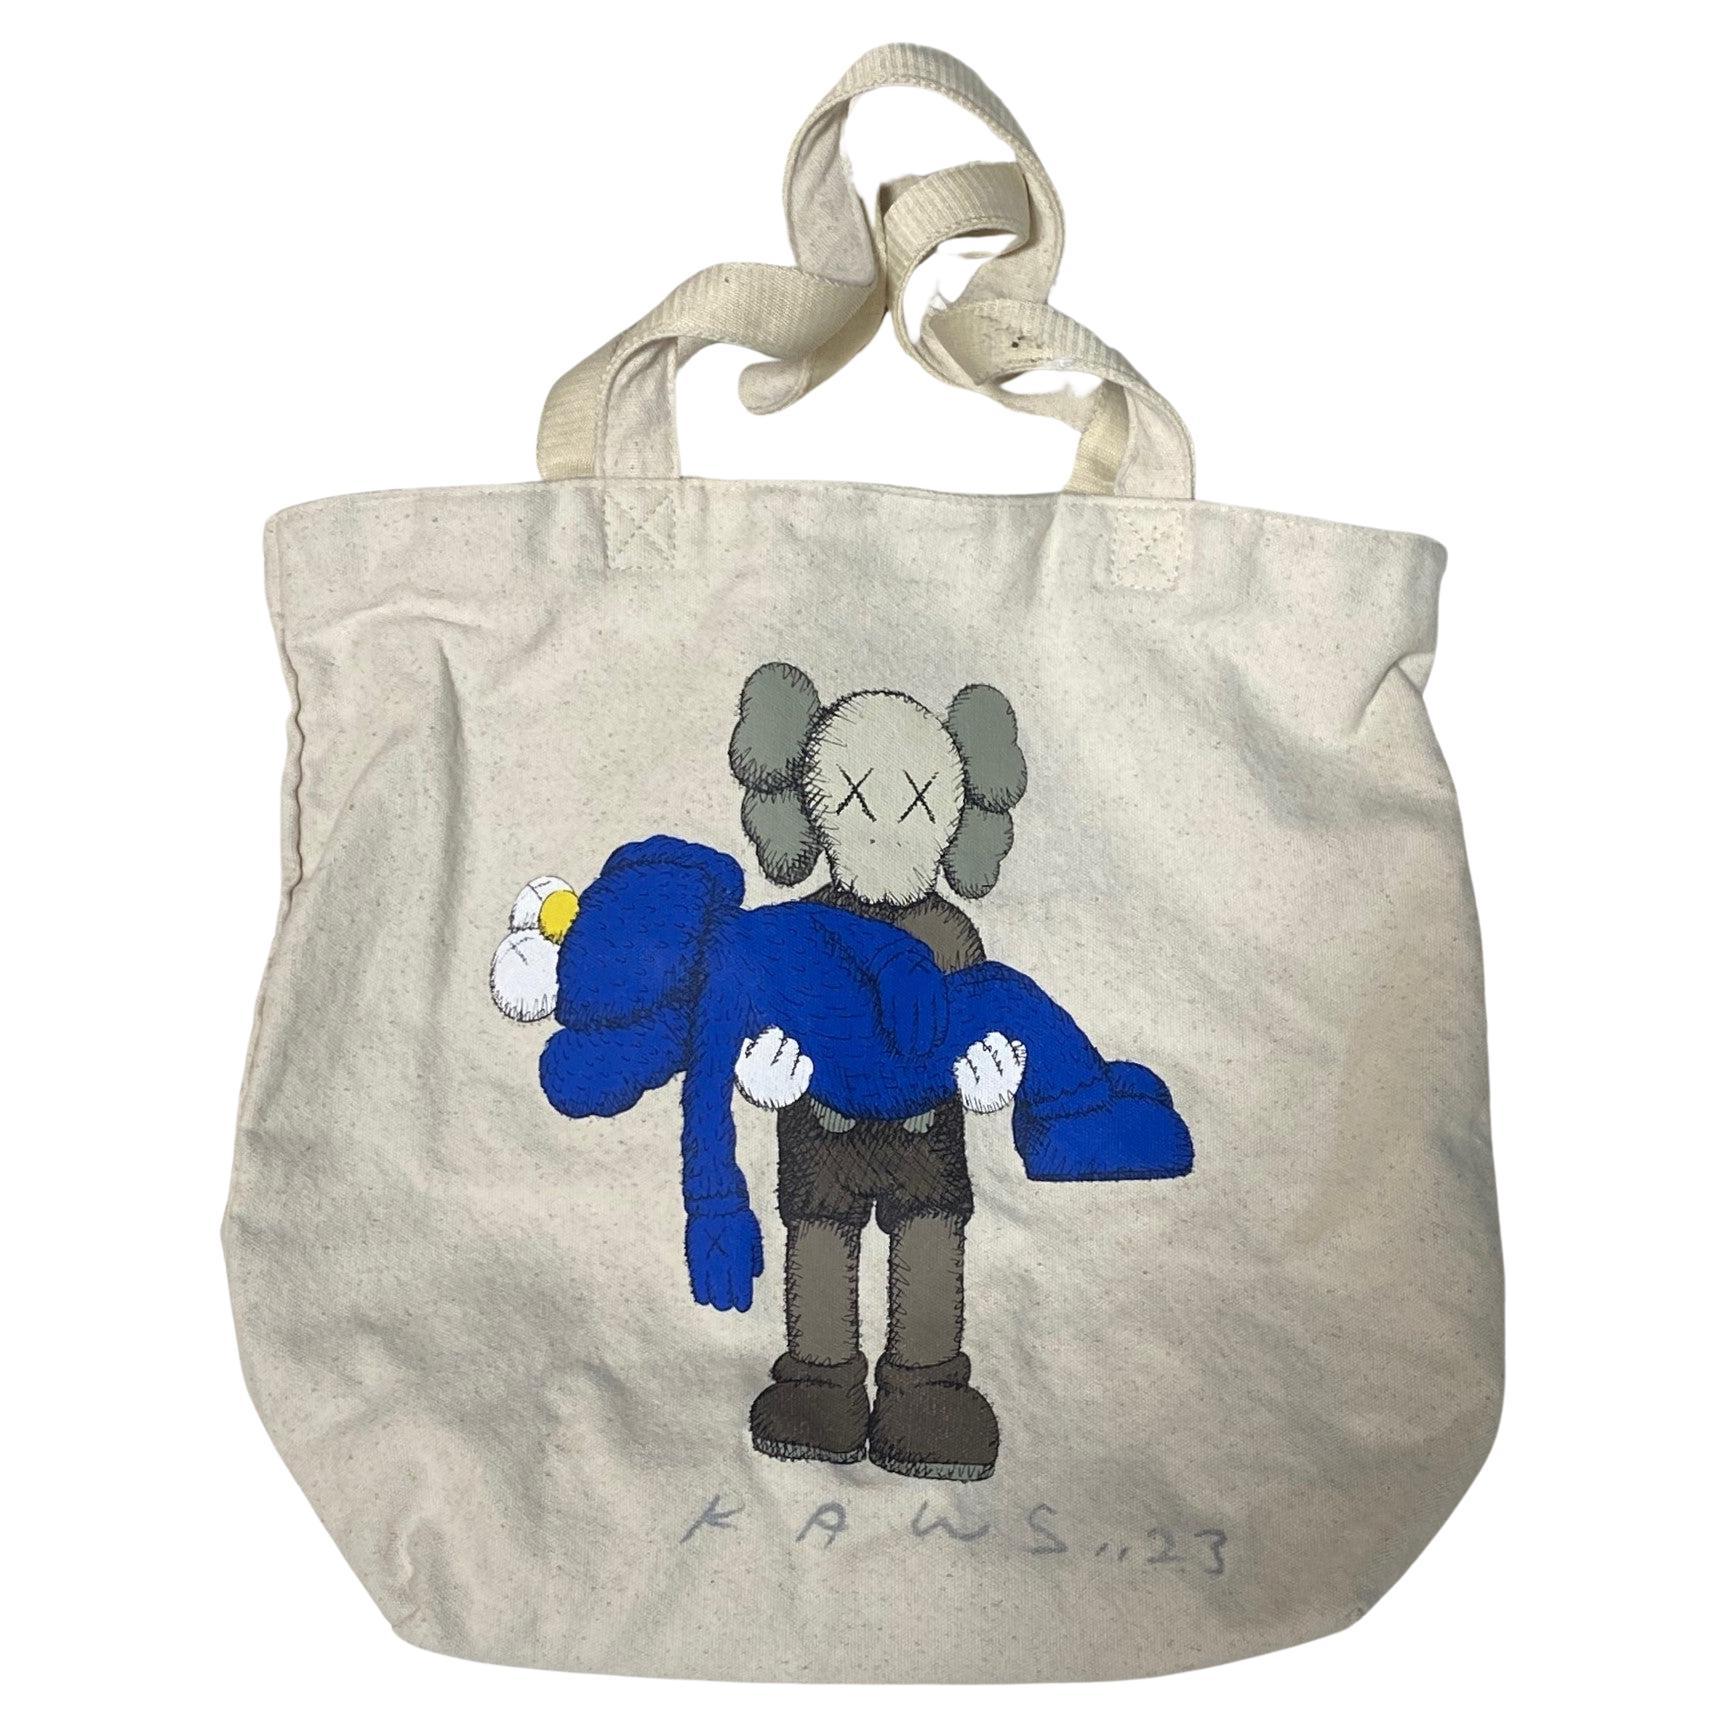 KAWS Brian Donnelly Rare Signed Natural Canvas Uniqlo X Tote Shopping Bag Gone For Sale